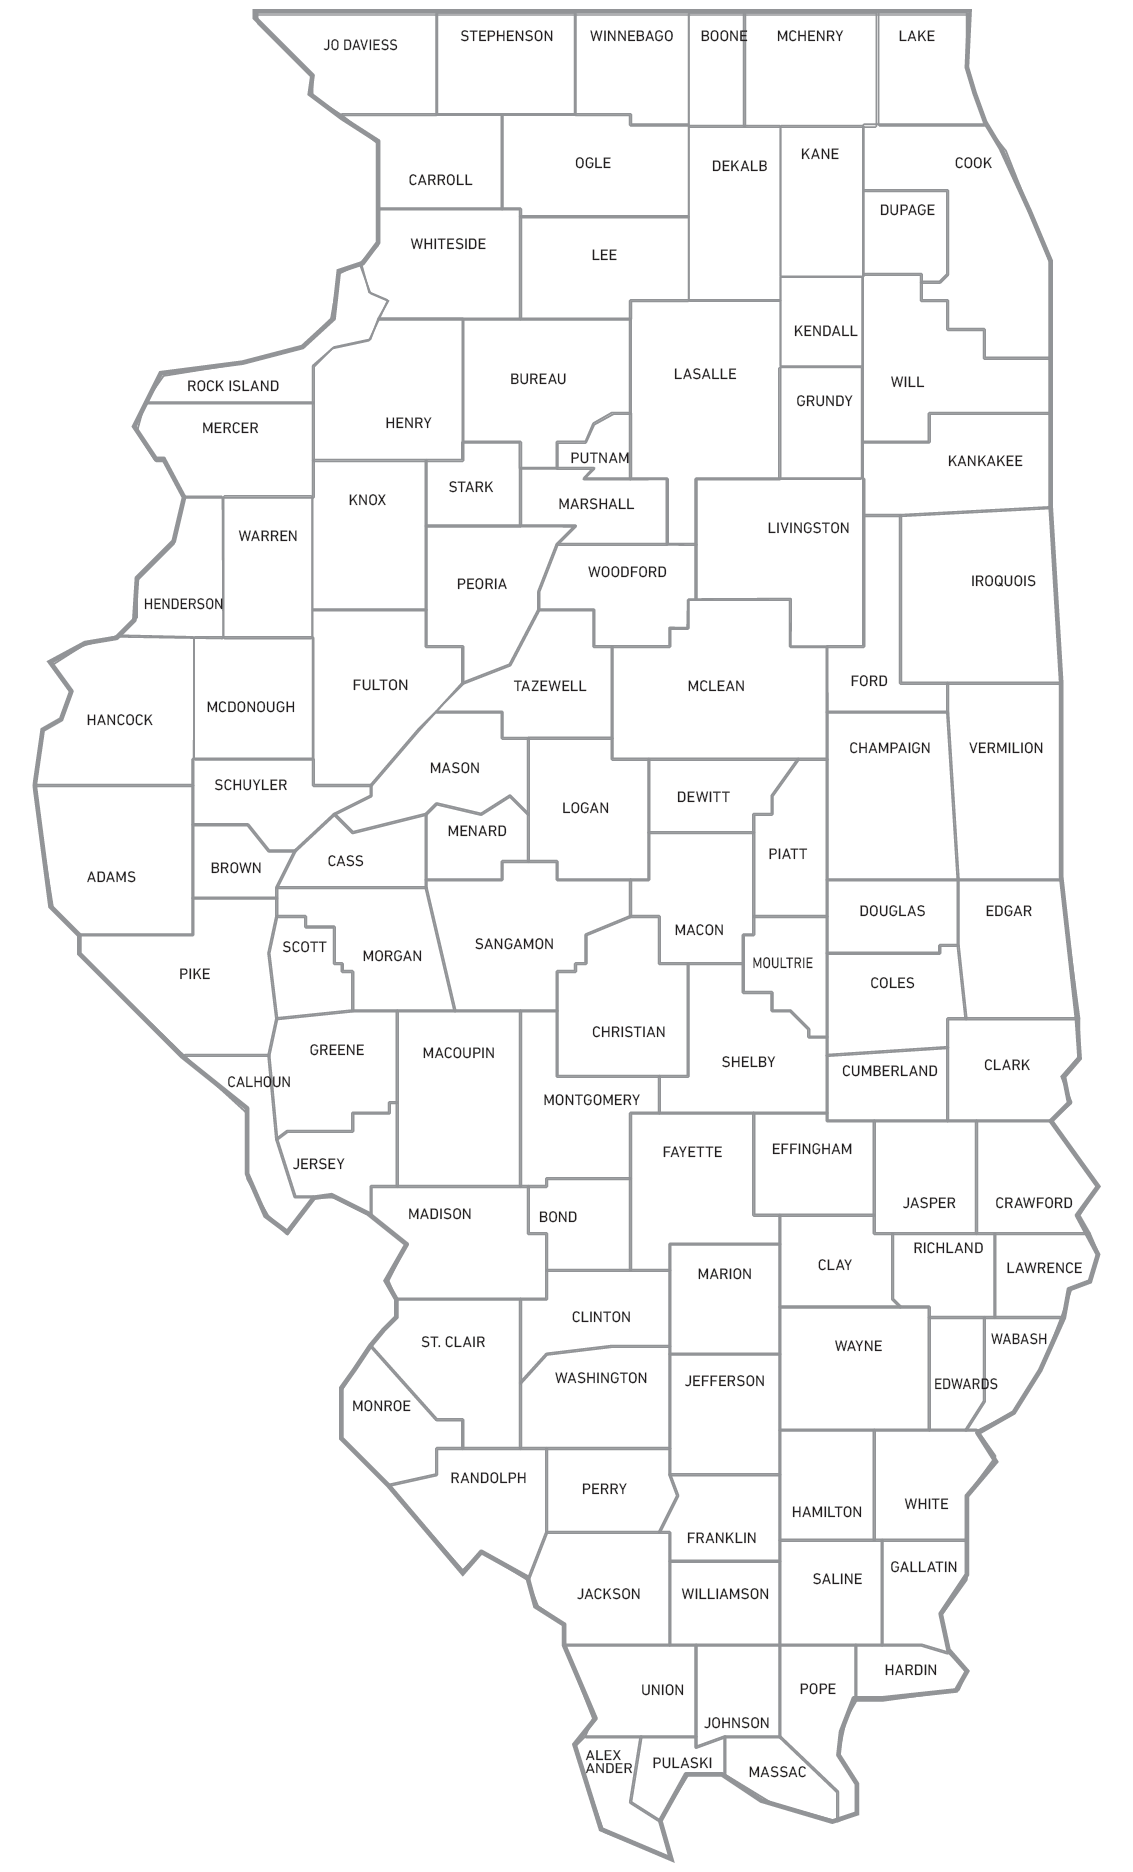 IL map with counties